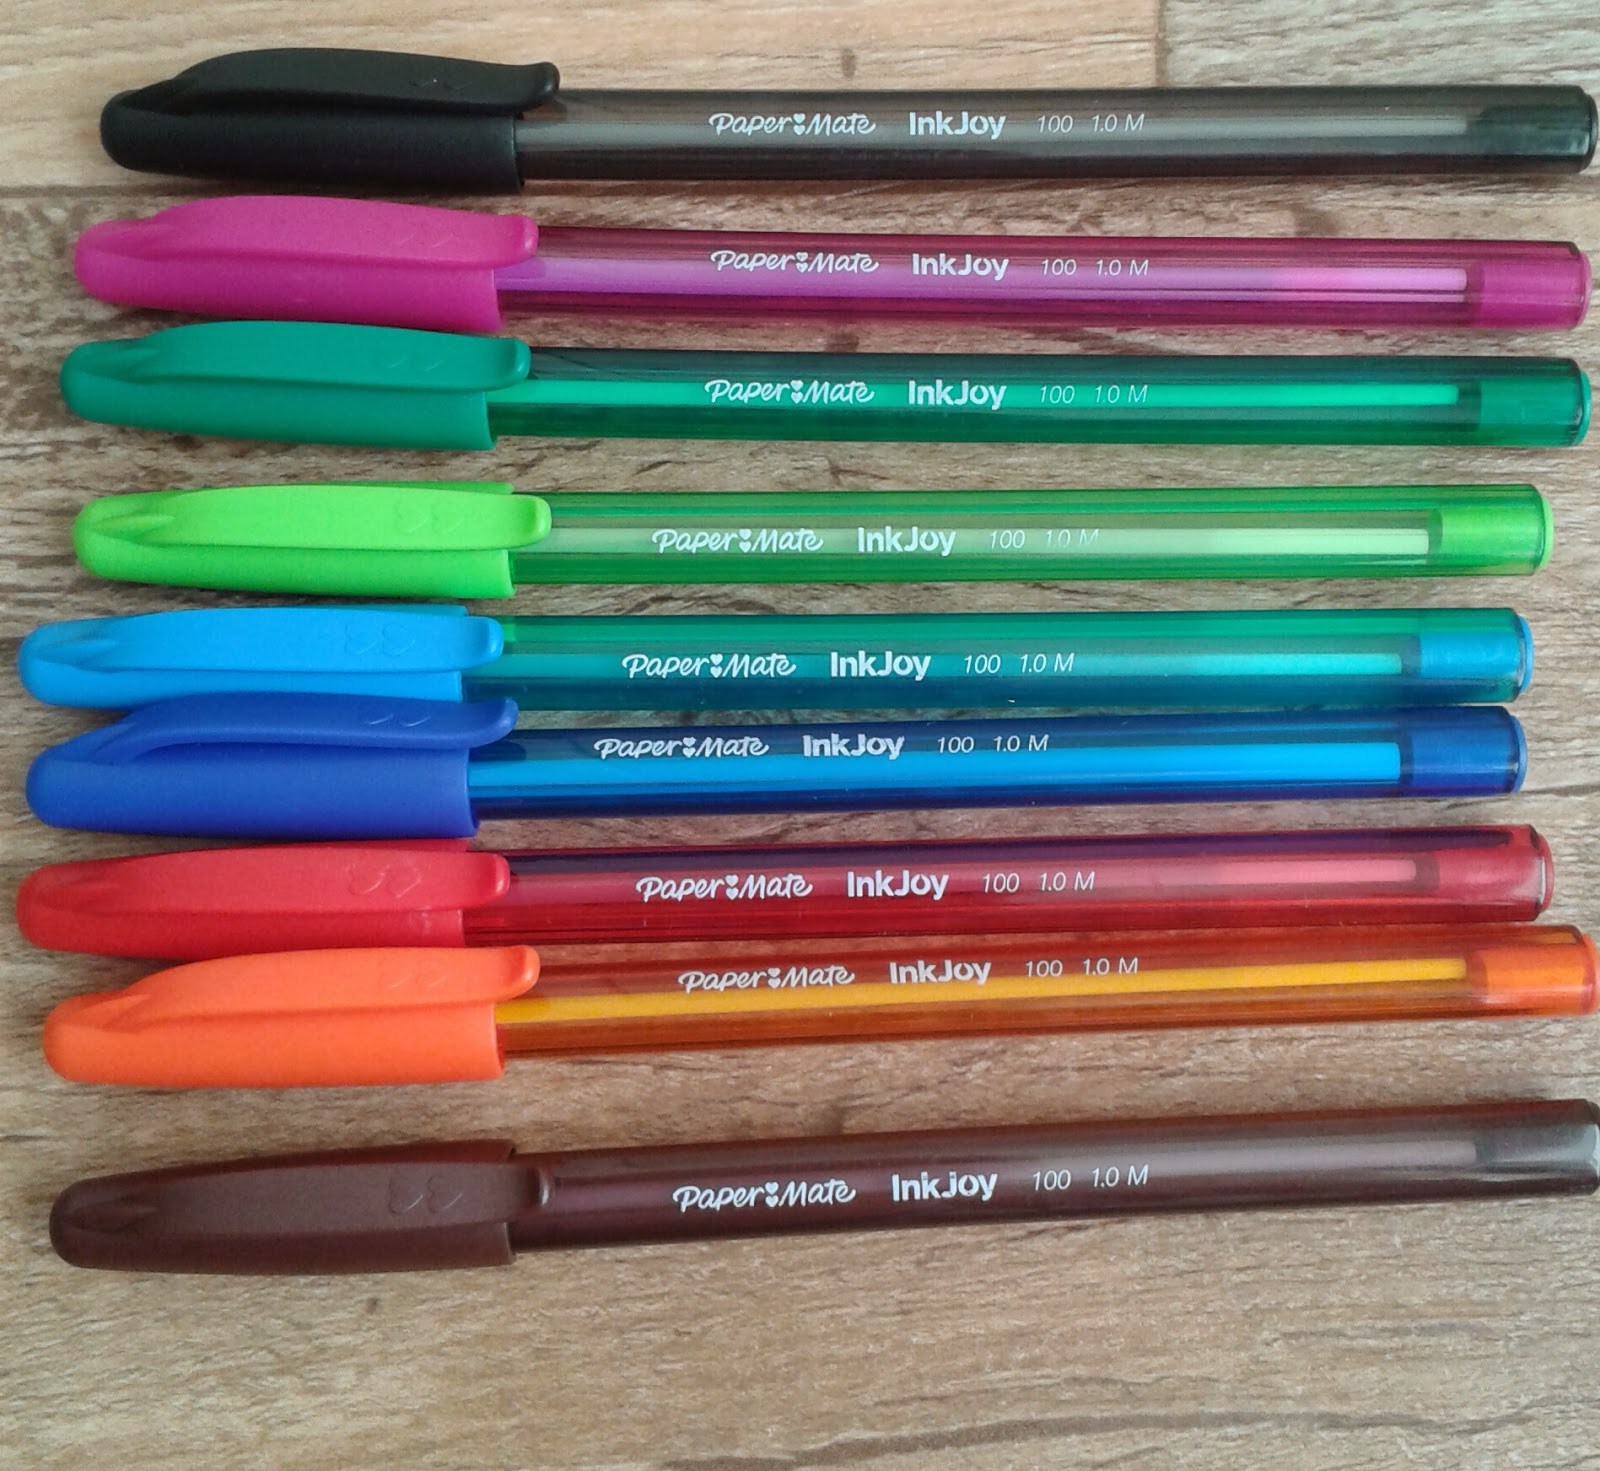 pen-collection-geekery-paper-mate-inkjoy-ballpoint-pens